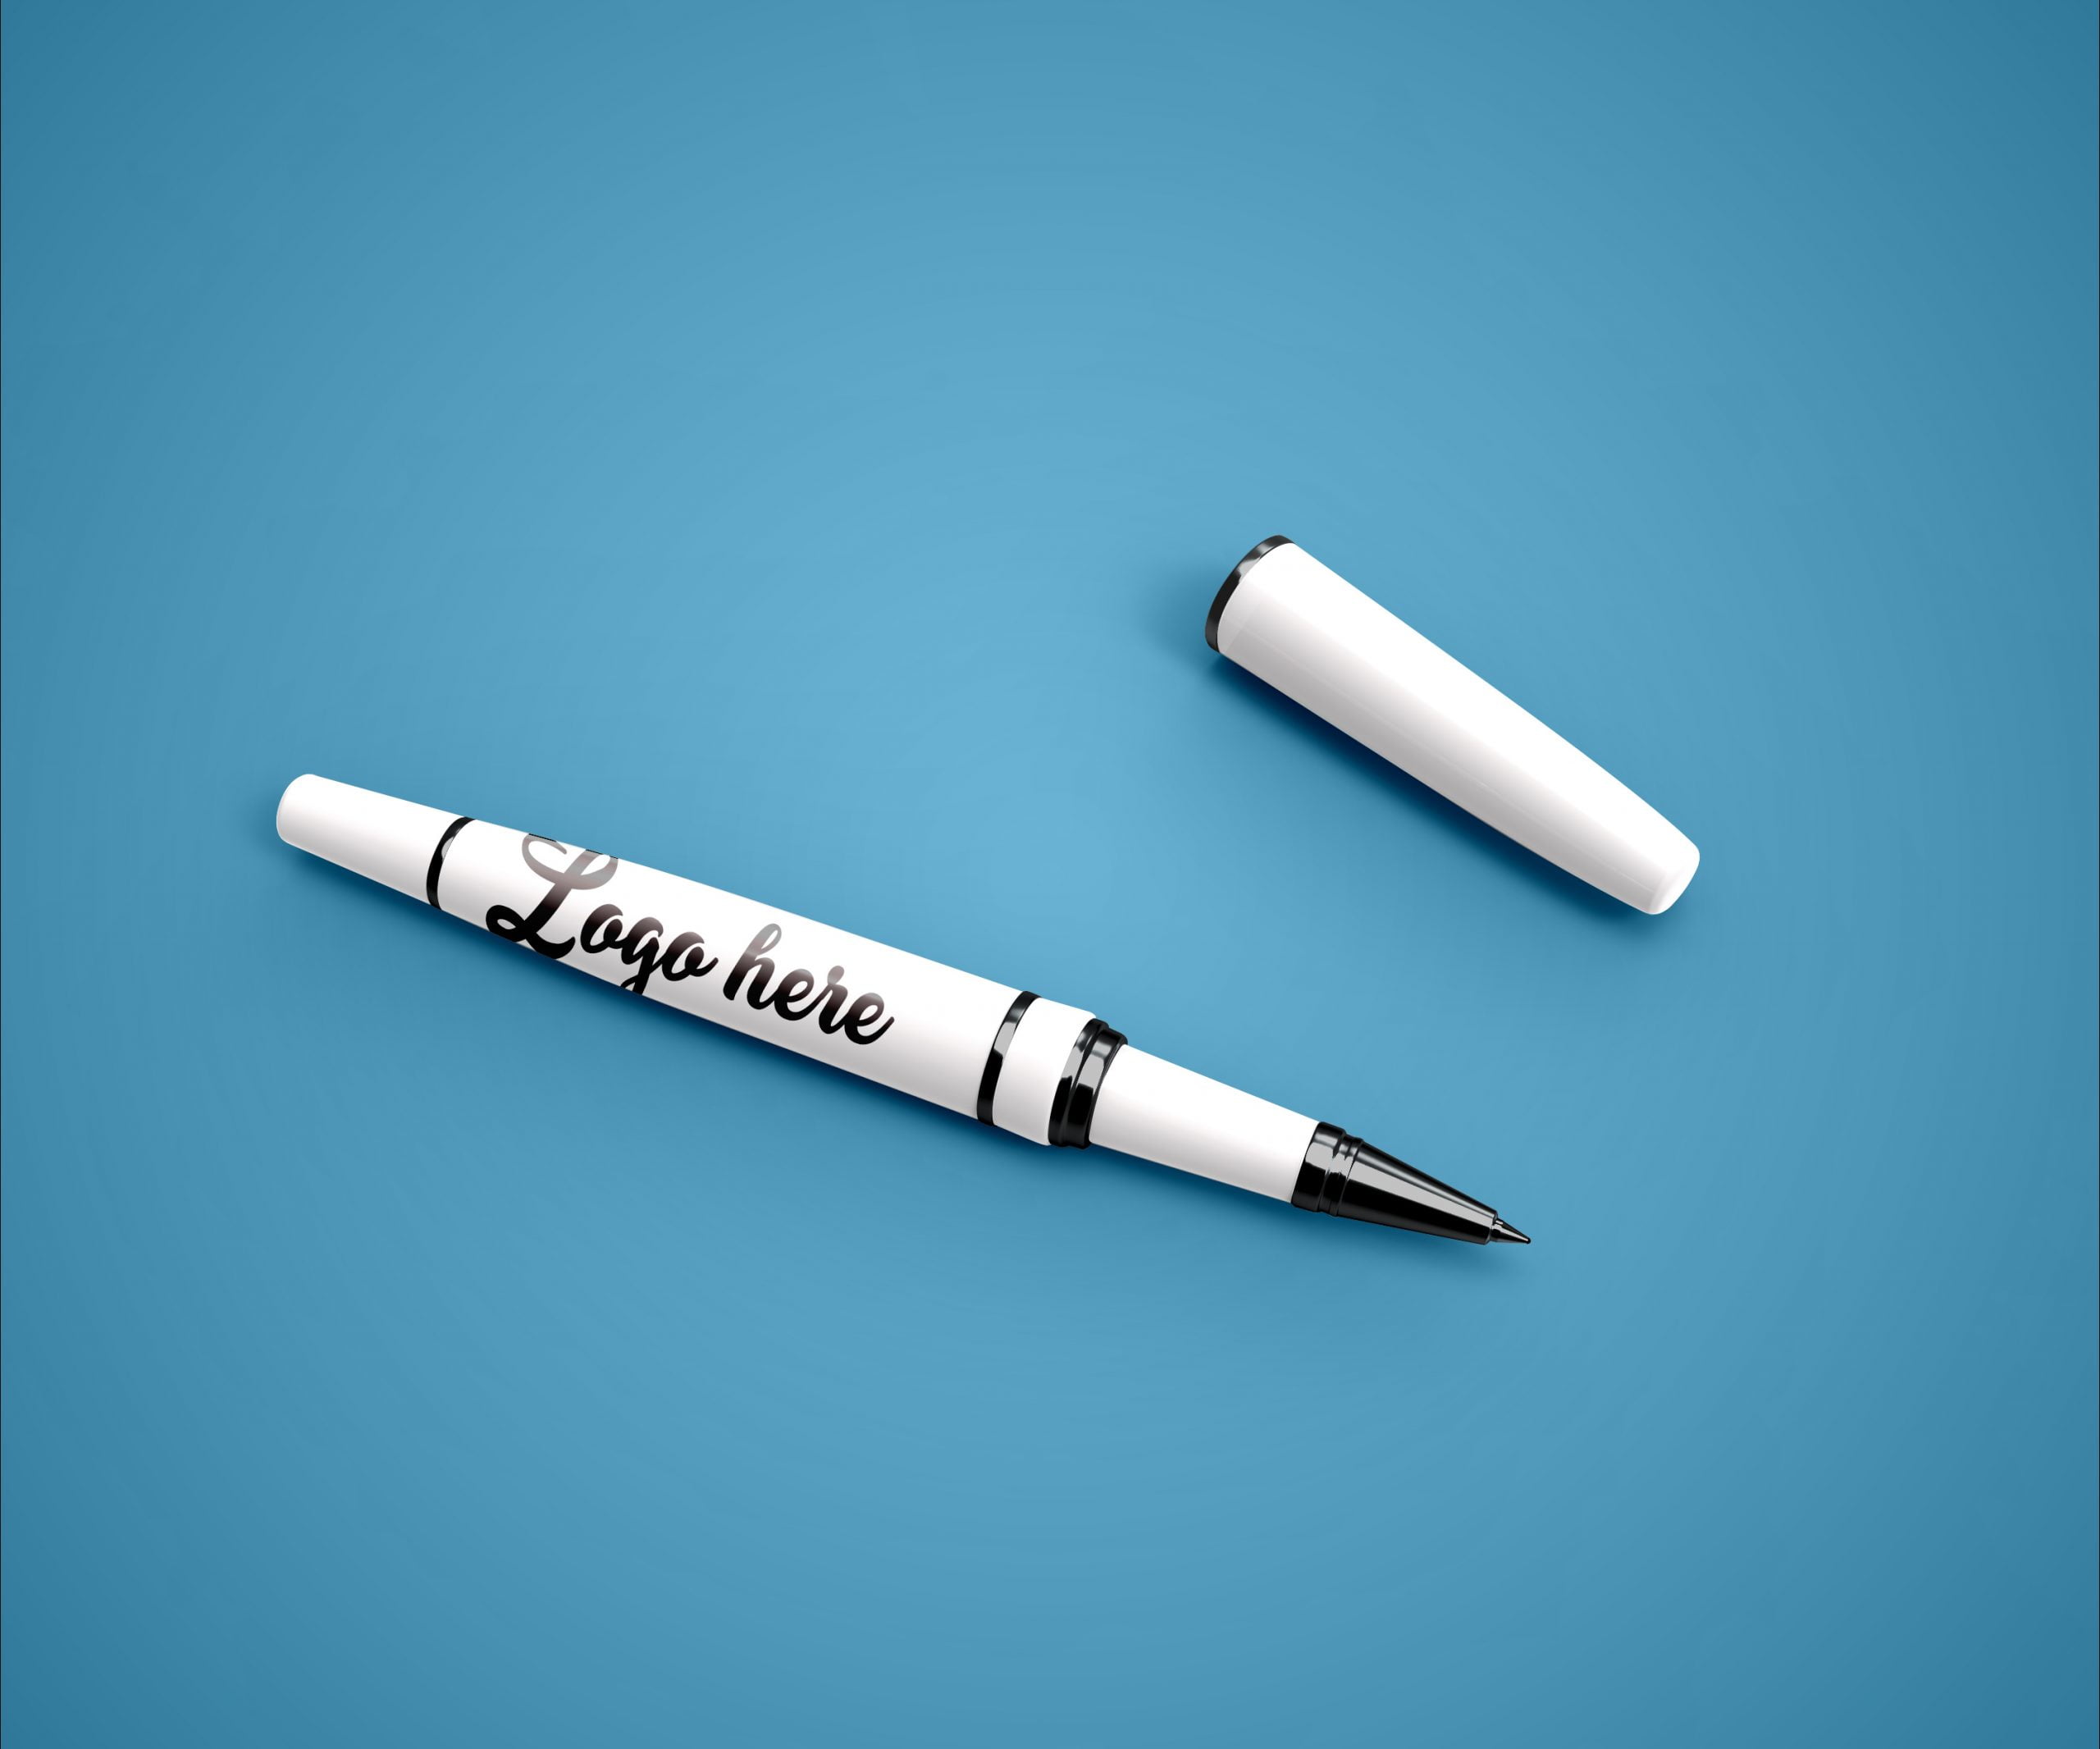 Free Pen Photoshop Mockup by GraphicsFamily